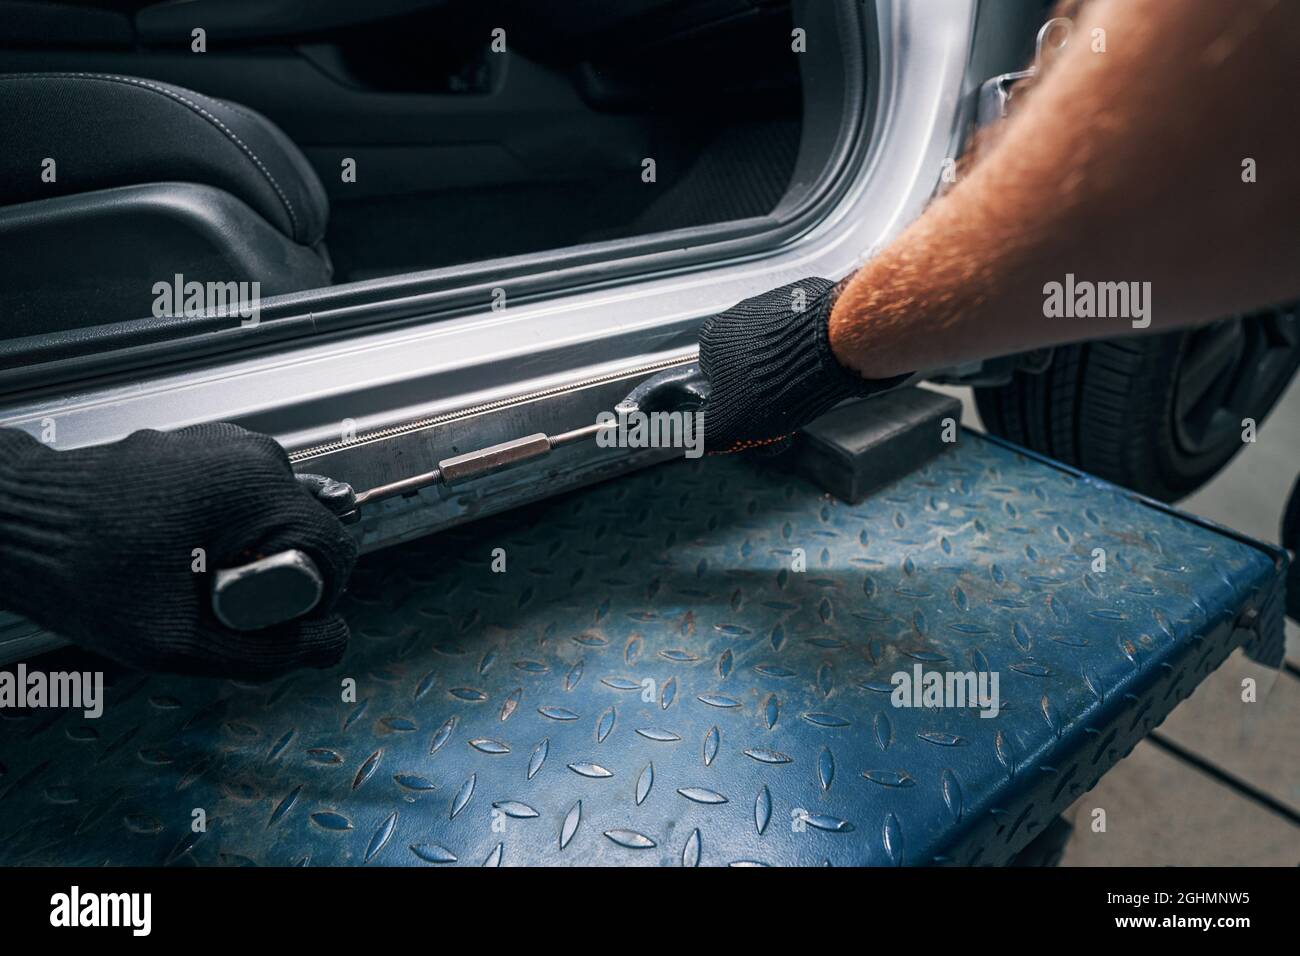 Straightening of car frame surface with peening instrument Stock Photo